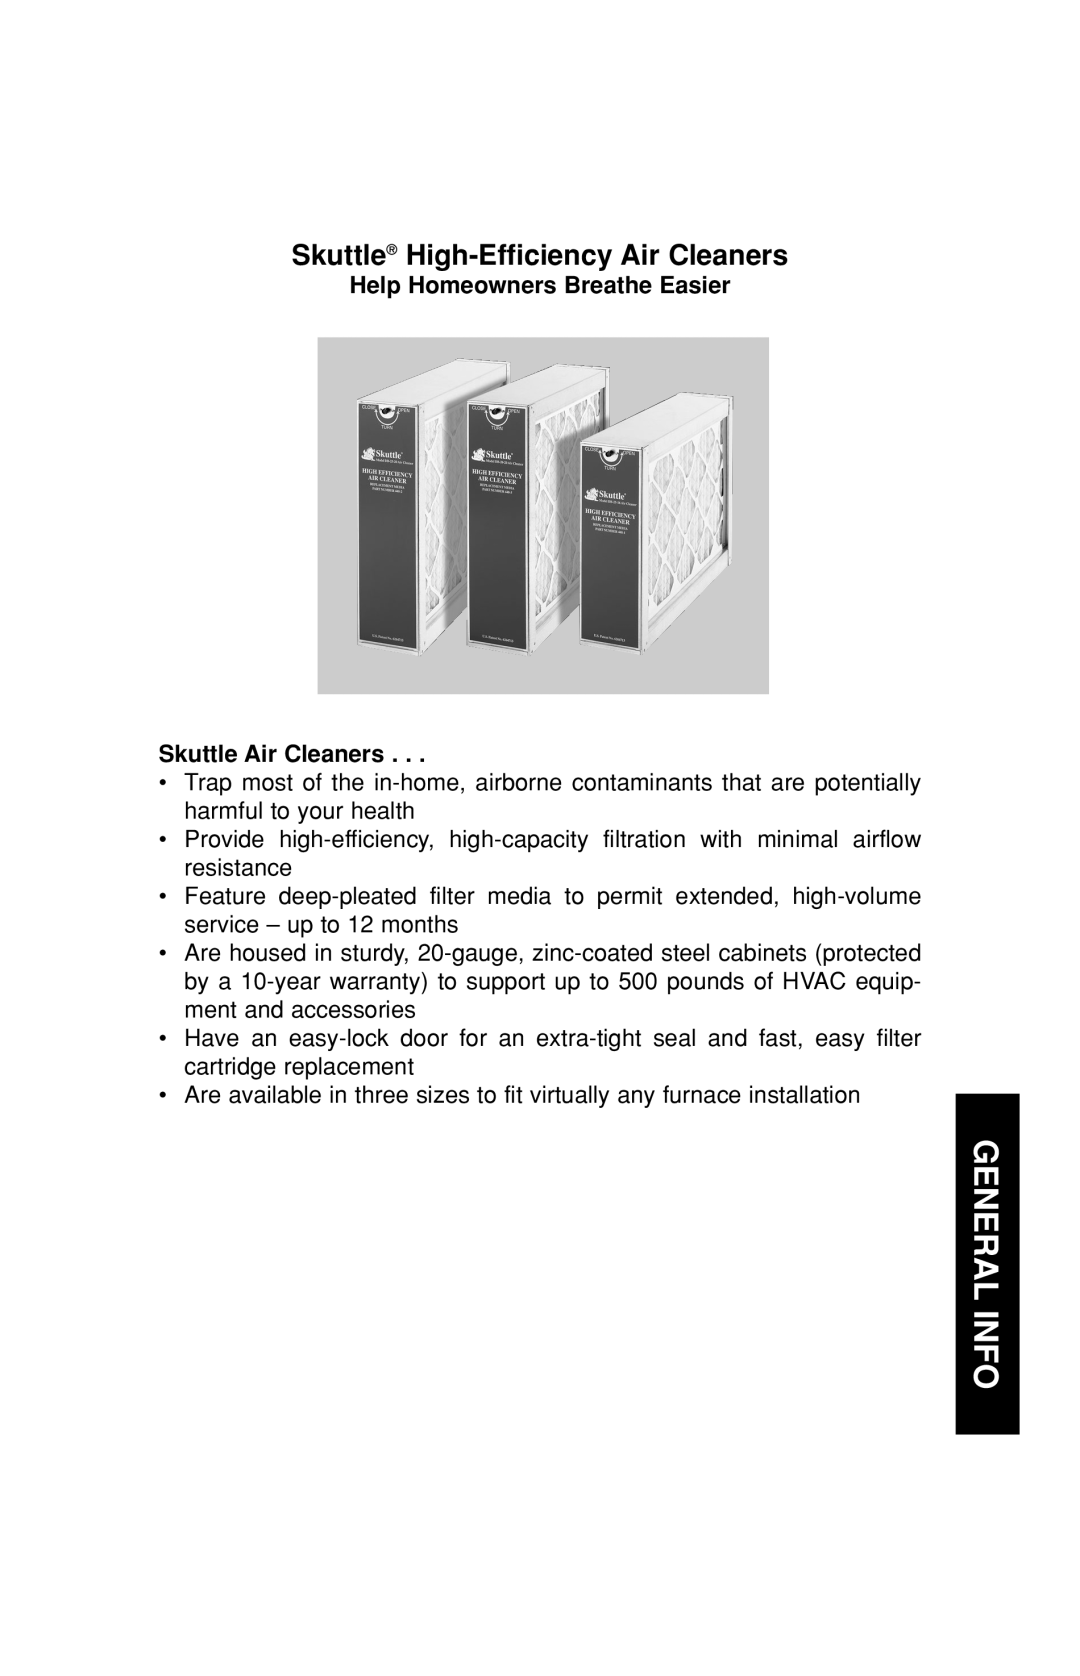 Skuttle Indoor Air Quality Products F60-1, F60-2 Skuttle High-EfficiencyAir Cleaners, General Info, Skuttle Air Cleaners 